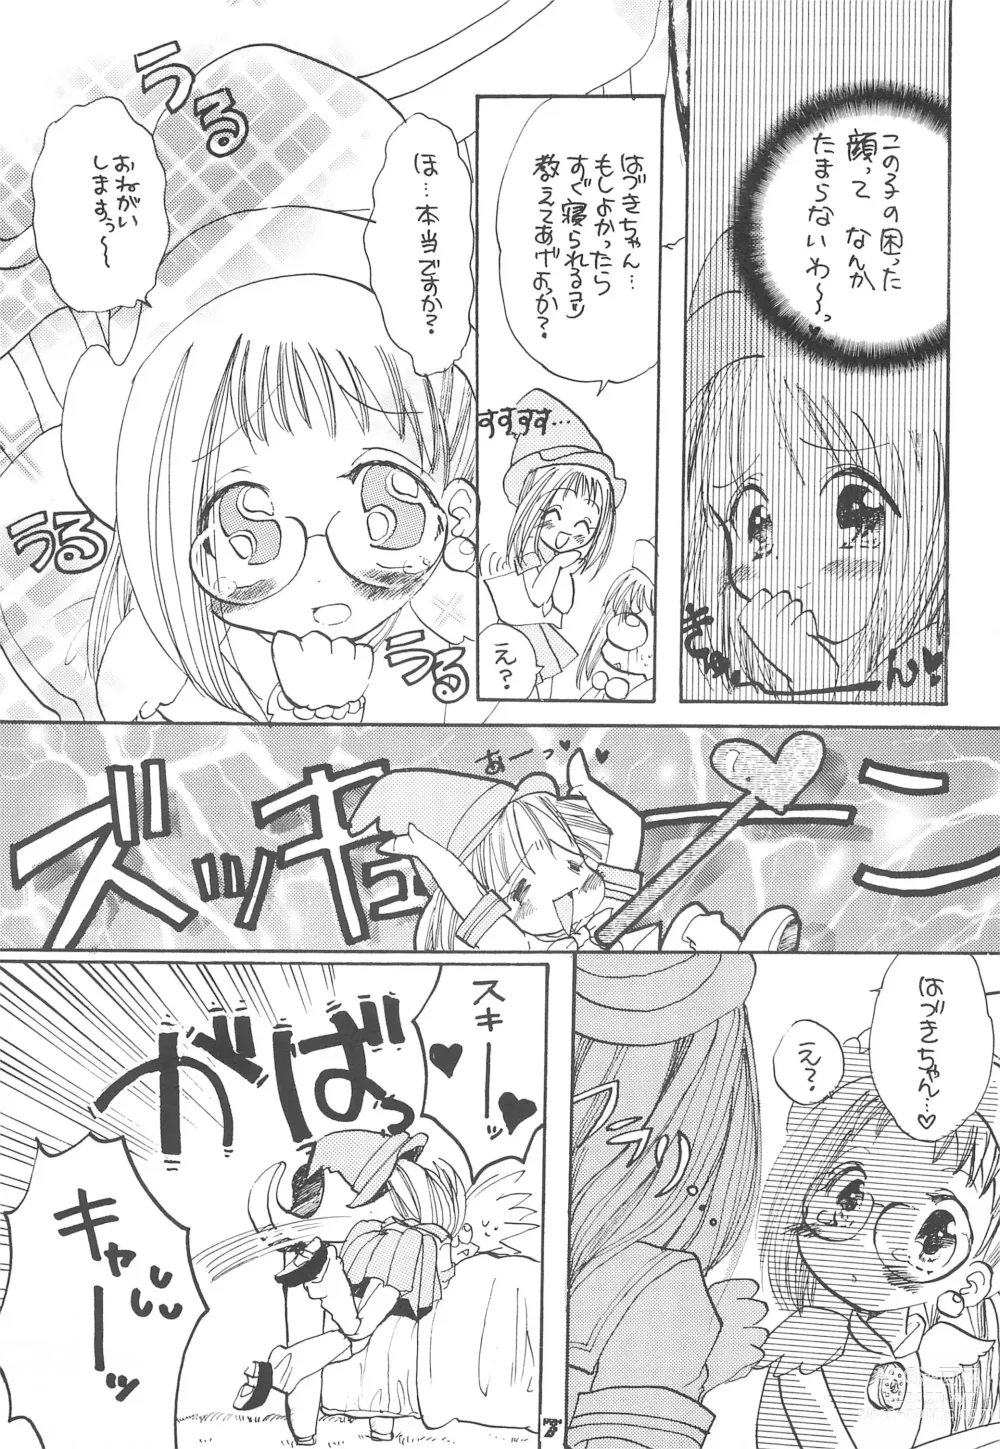 Page 9 of doujinshi Twinkle Melody